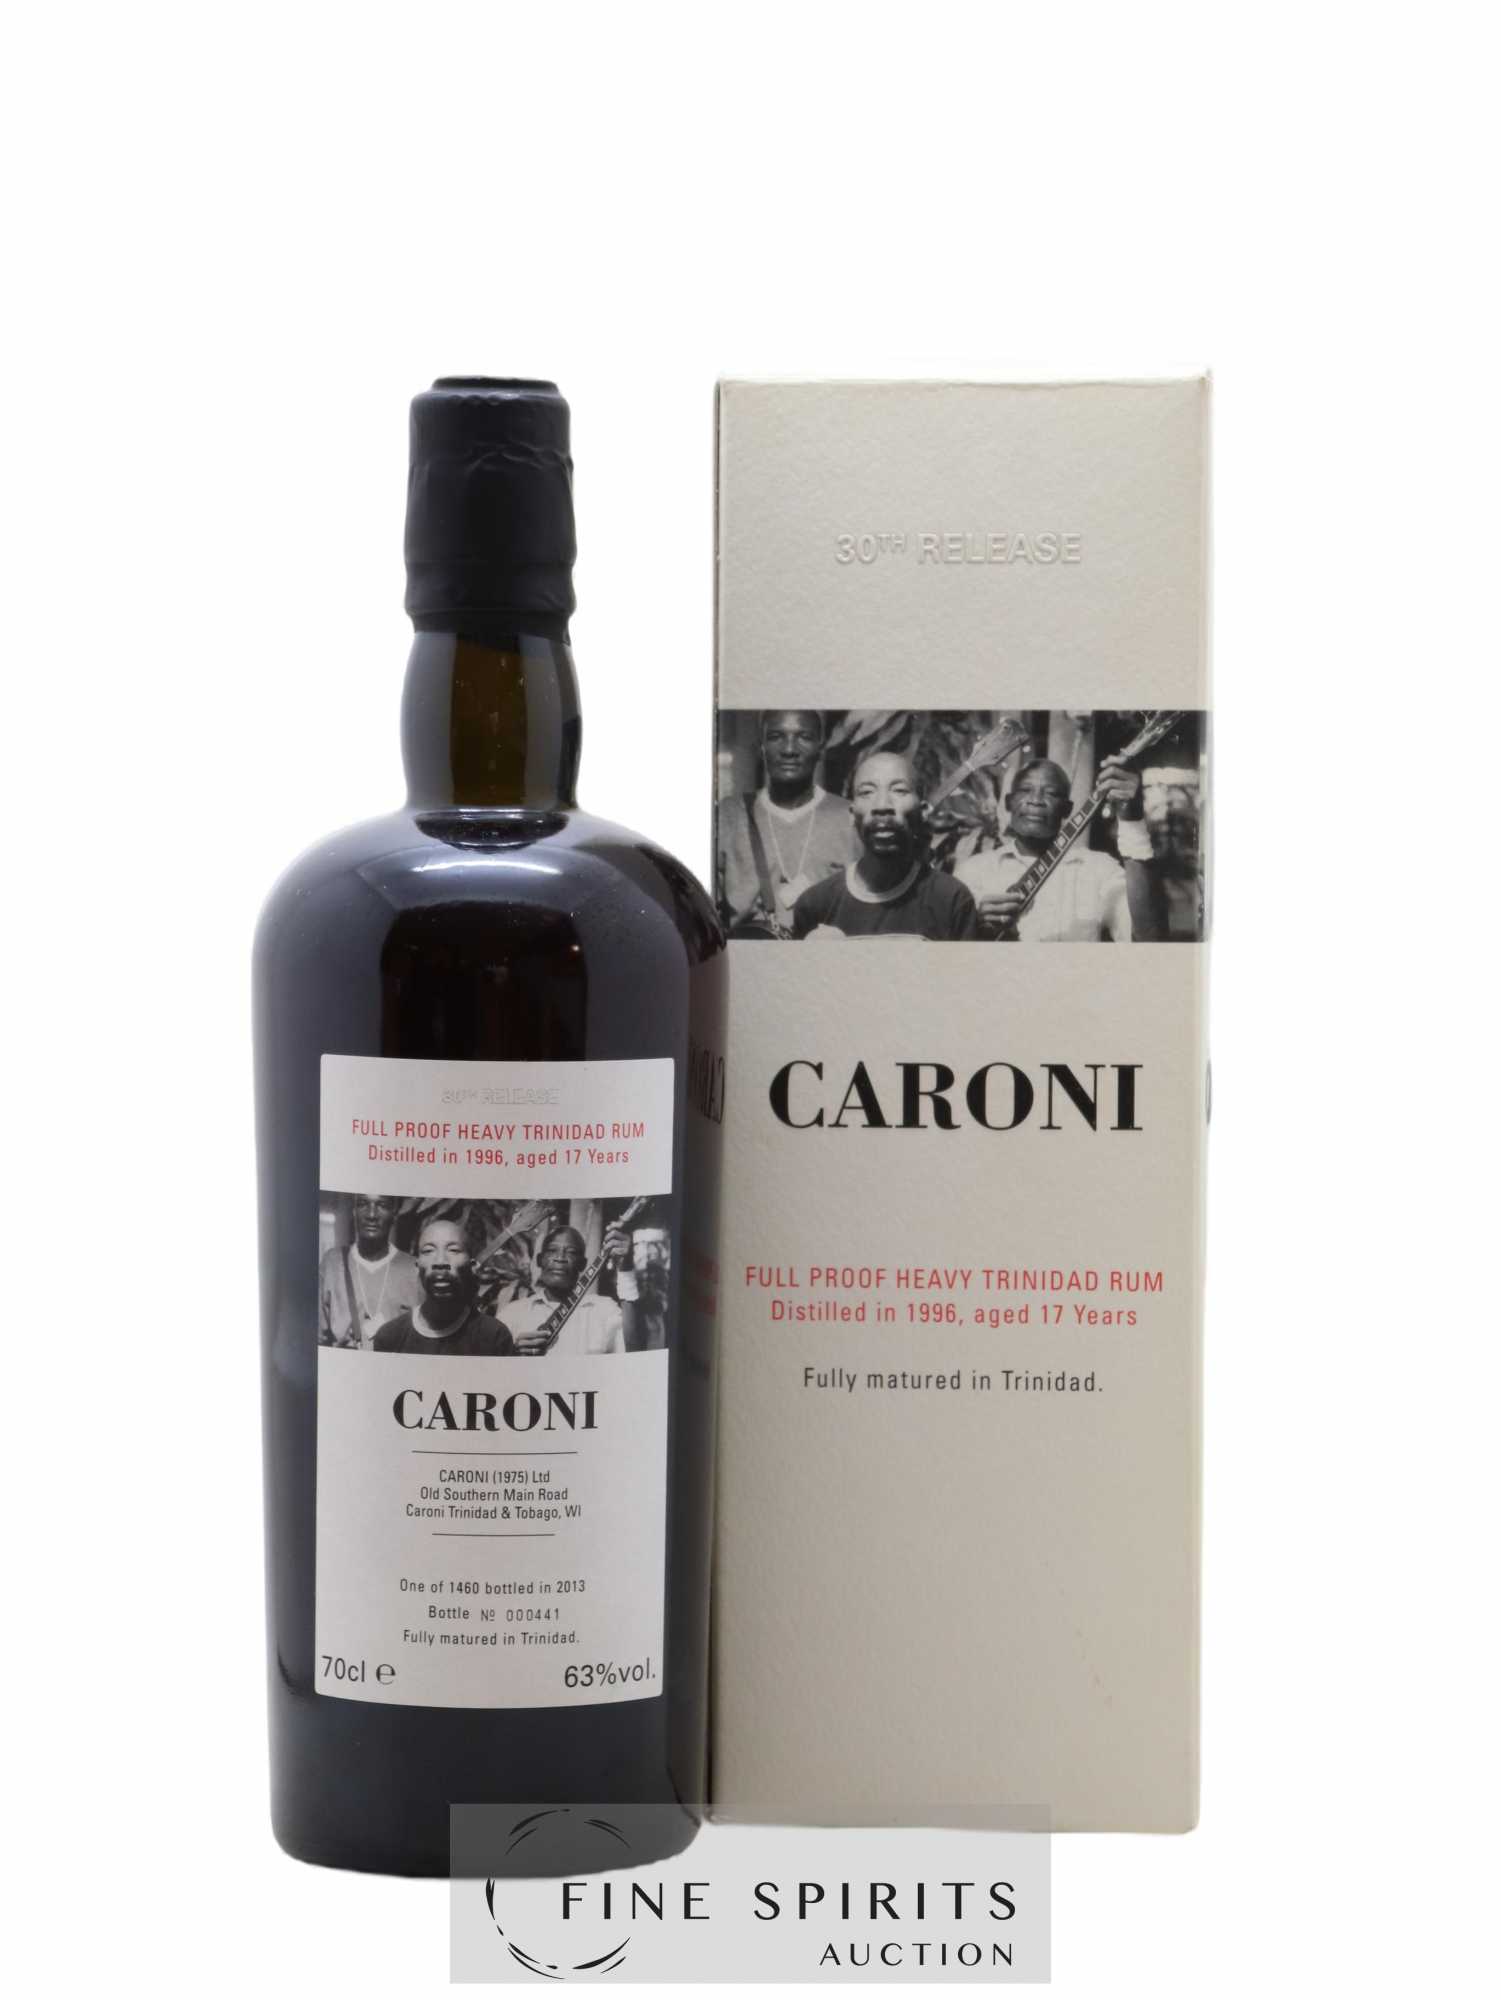 Caroni 17 years 1996 Velier The Faces 30th Release - One of 1460 - bottled 2013